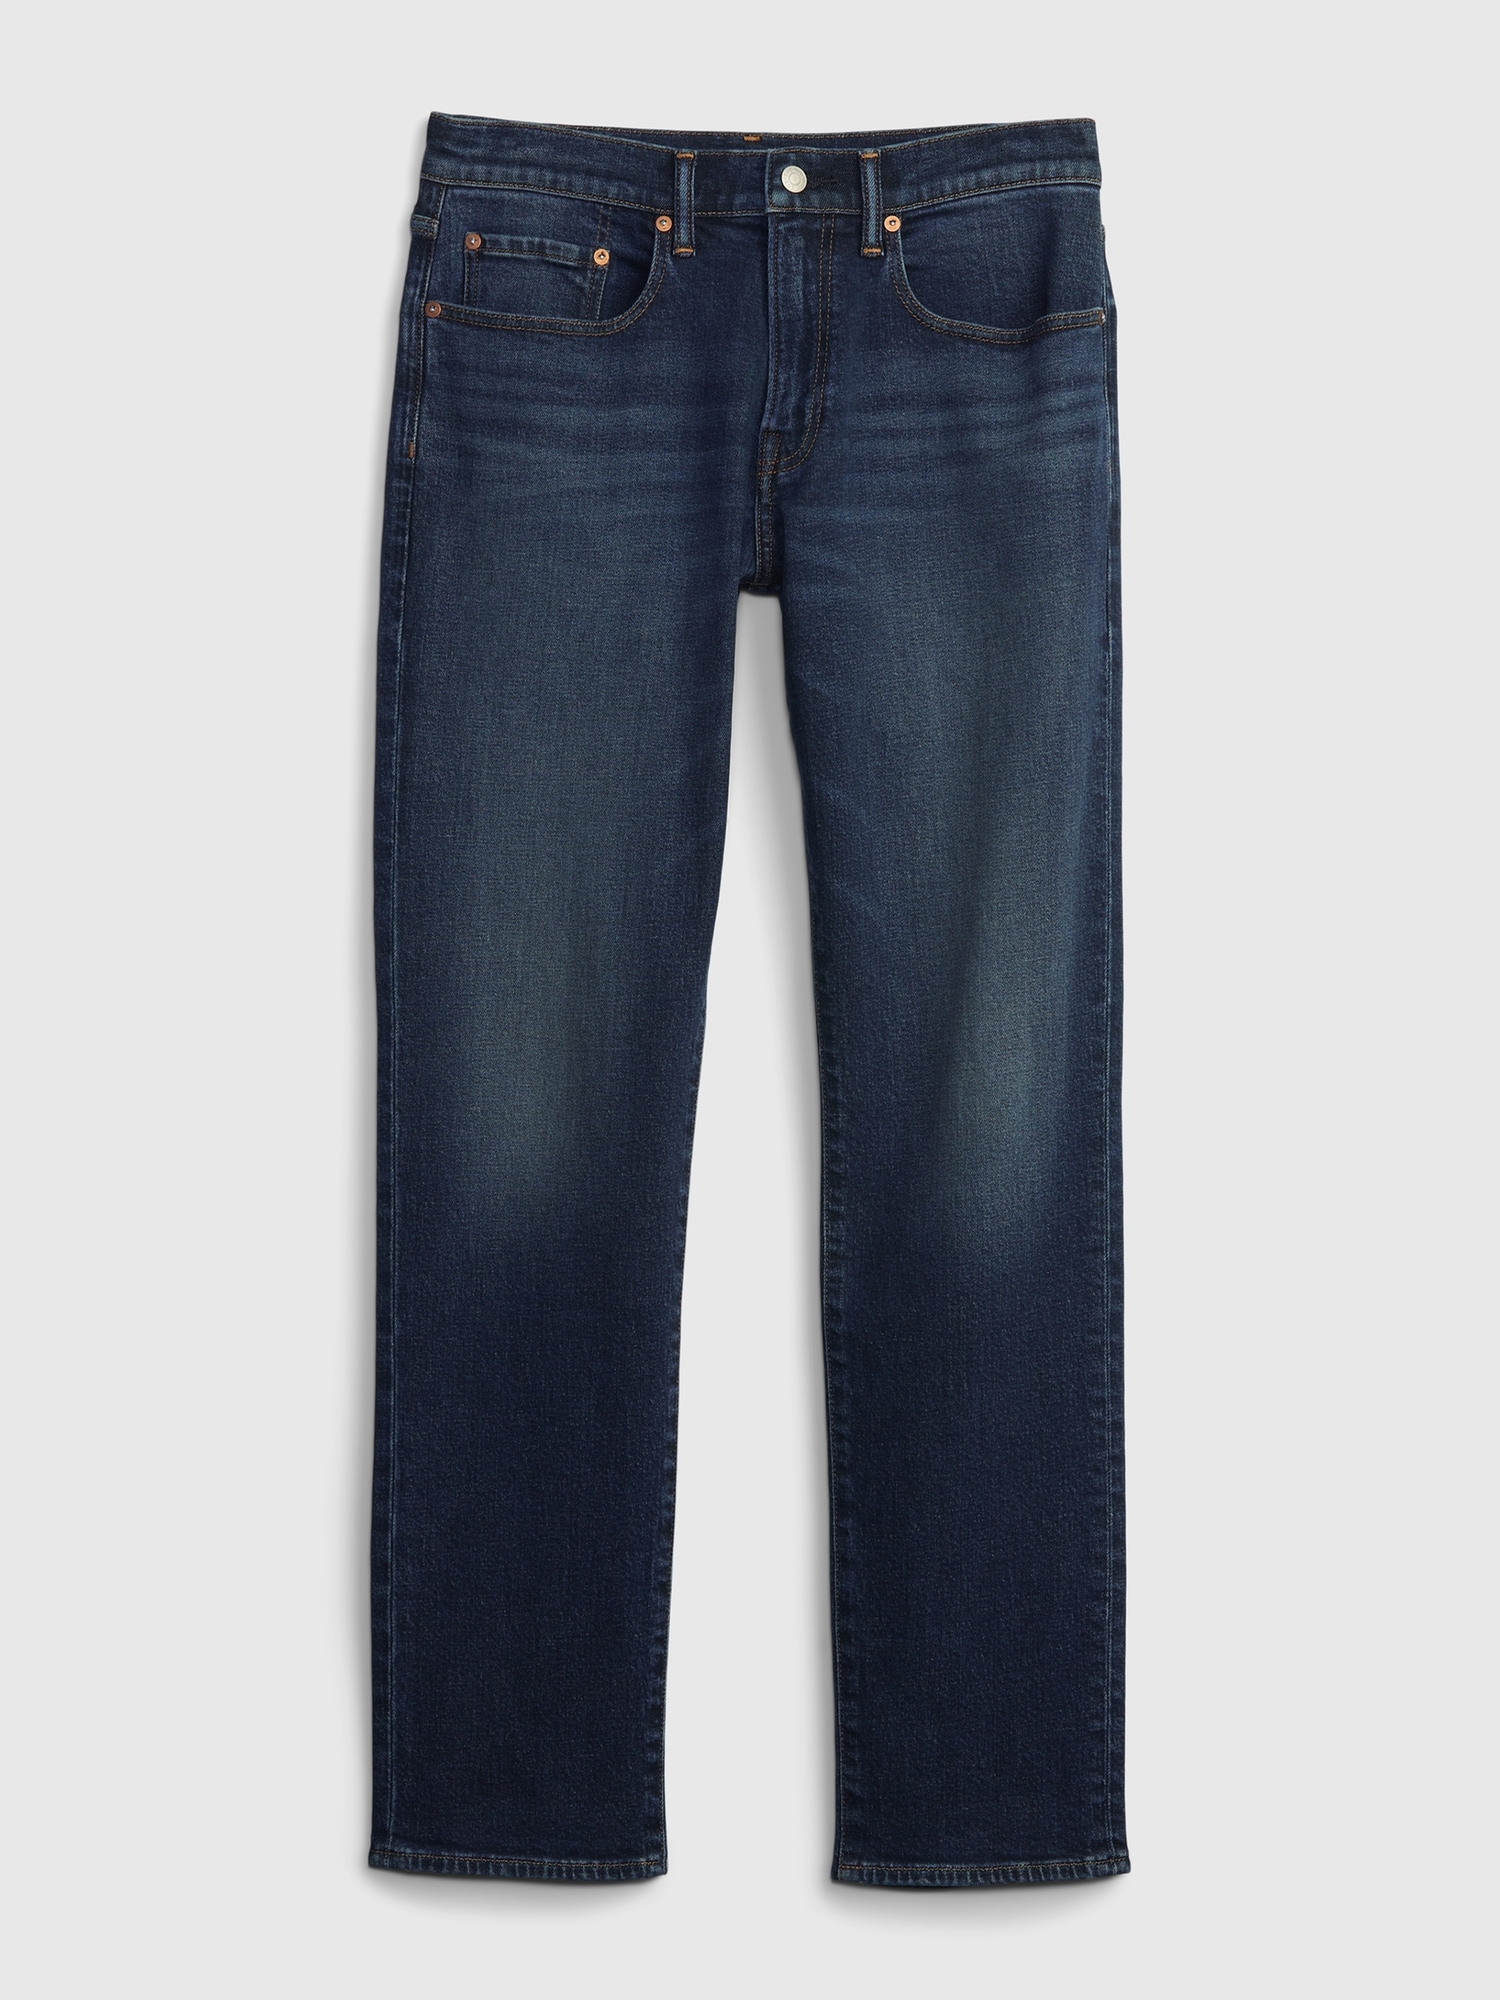 Gap Jeans soft wear slim jeans with Washwell